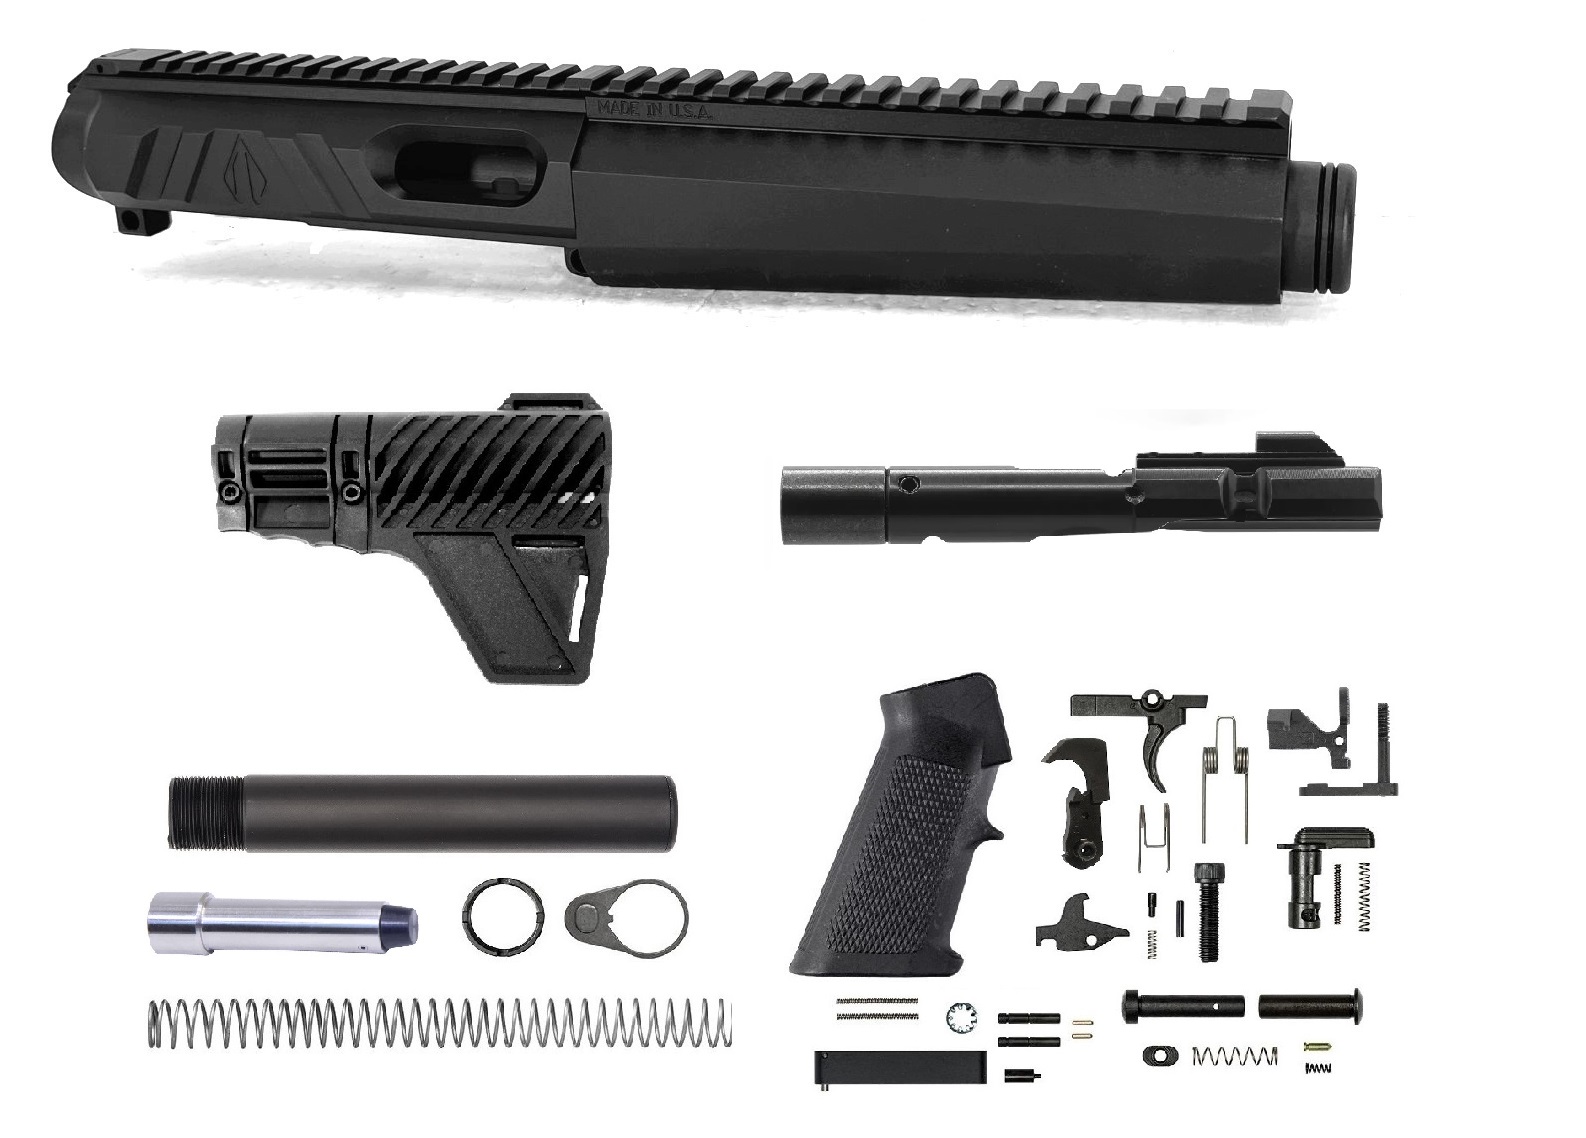 5 inch AR-15 AR-V MP5 Style NR Side Charging 45 ACP Pistol Caliber Melonite Upper w/Can Complete Kit